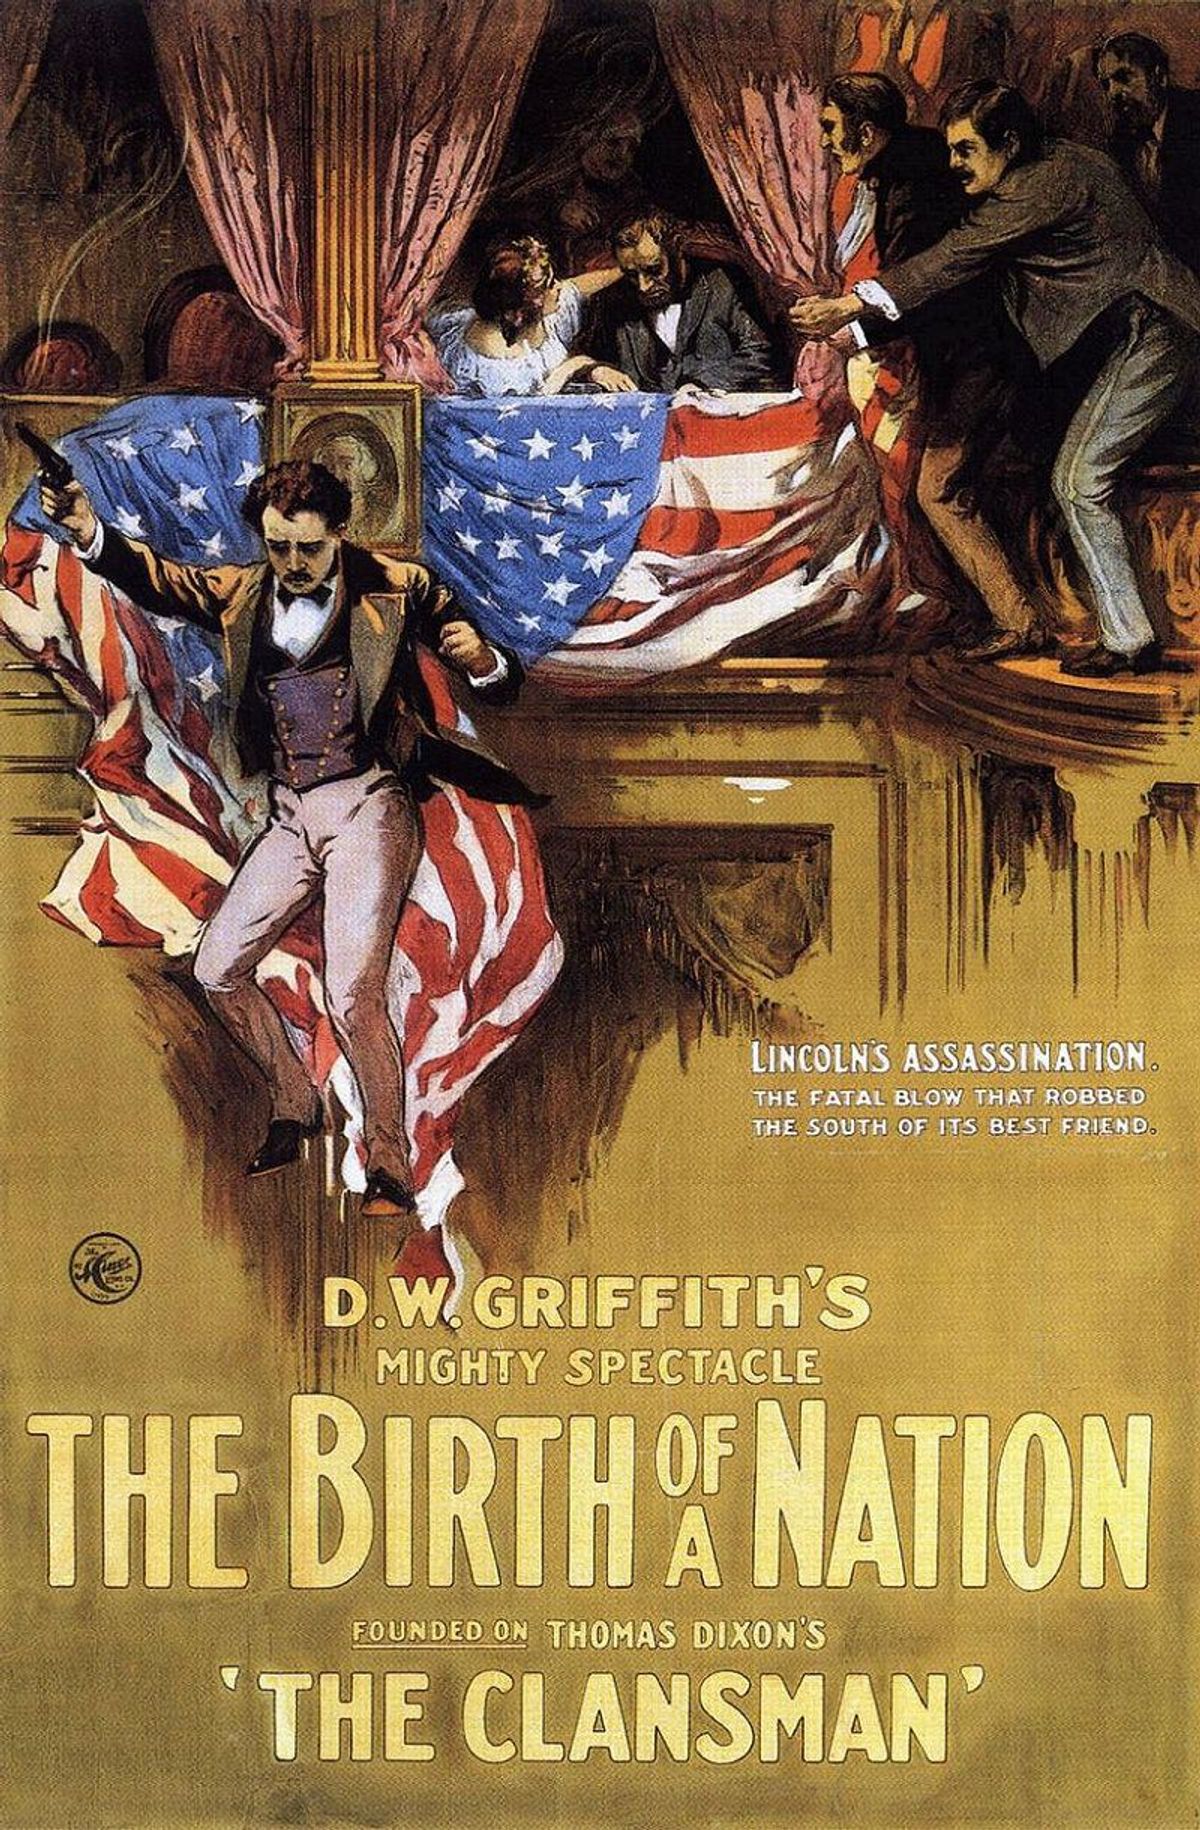 The Story Of "The Birth Of A Nation"